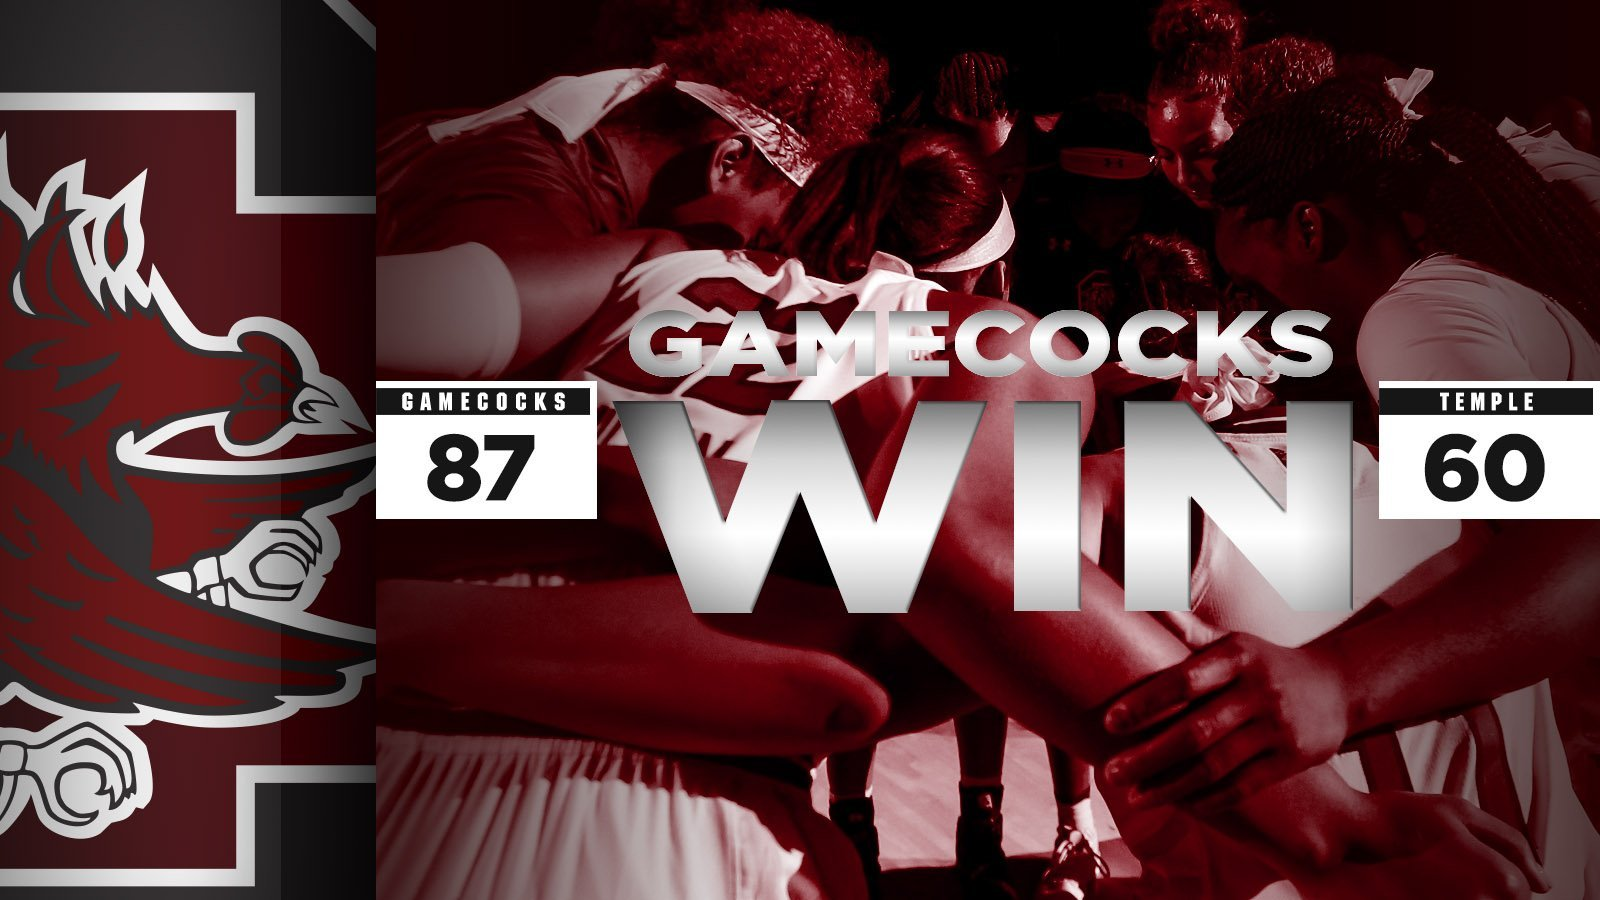 Wilson Helps No. 4 South Carolina Rout Temple 87-60